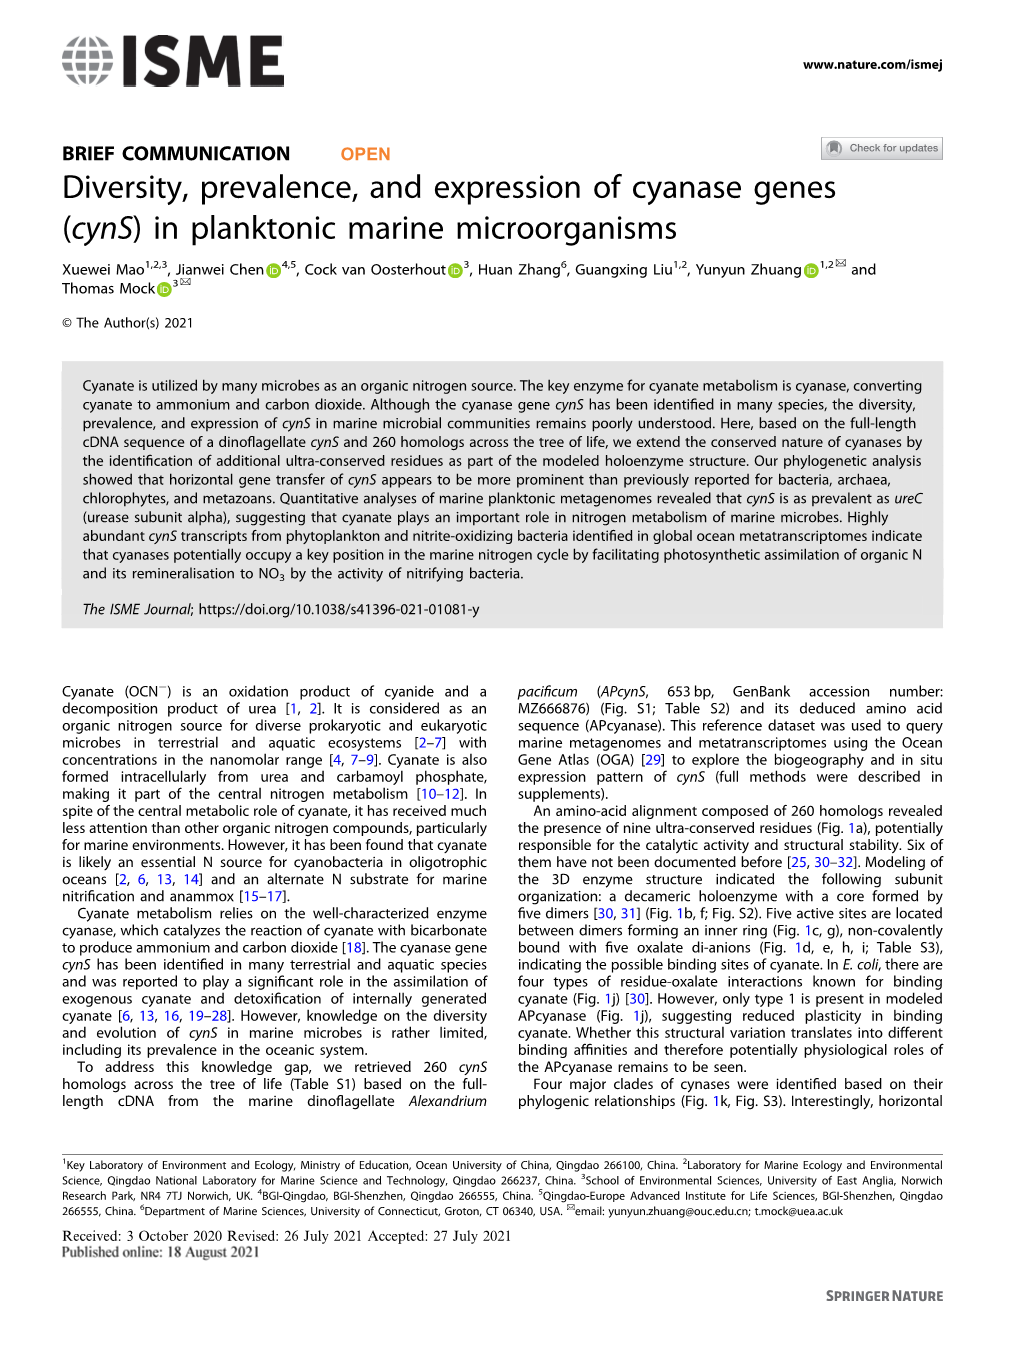 Diversity, Prevalence, and Expression of Cyanase Genes (Cyns) in Planktonic Marine Microorganisms